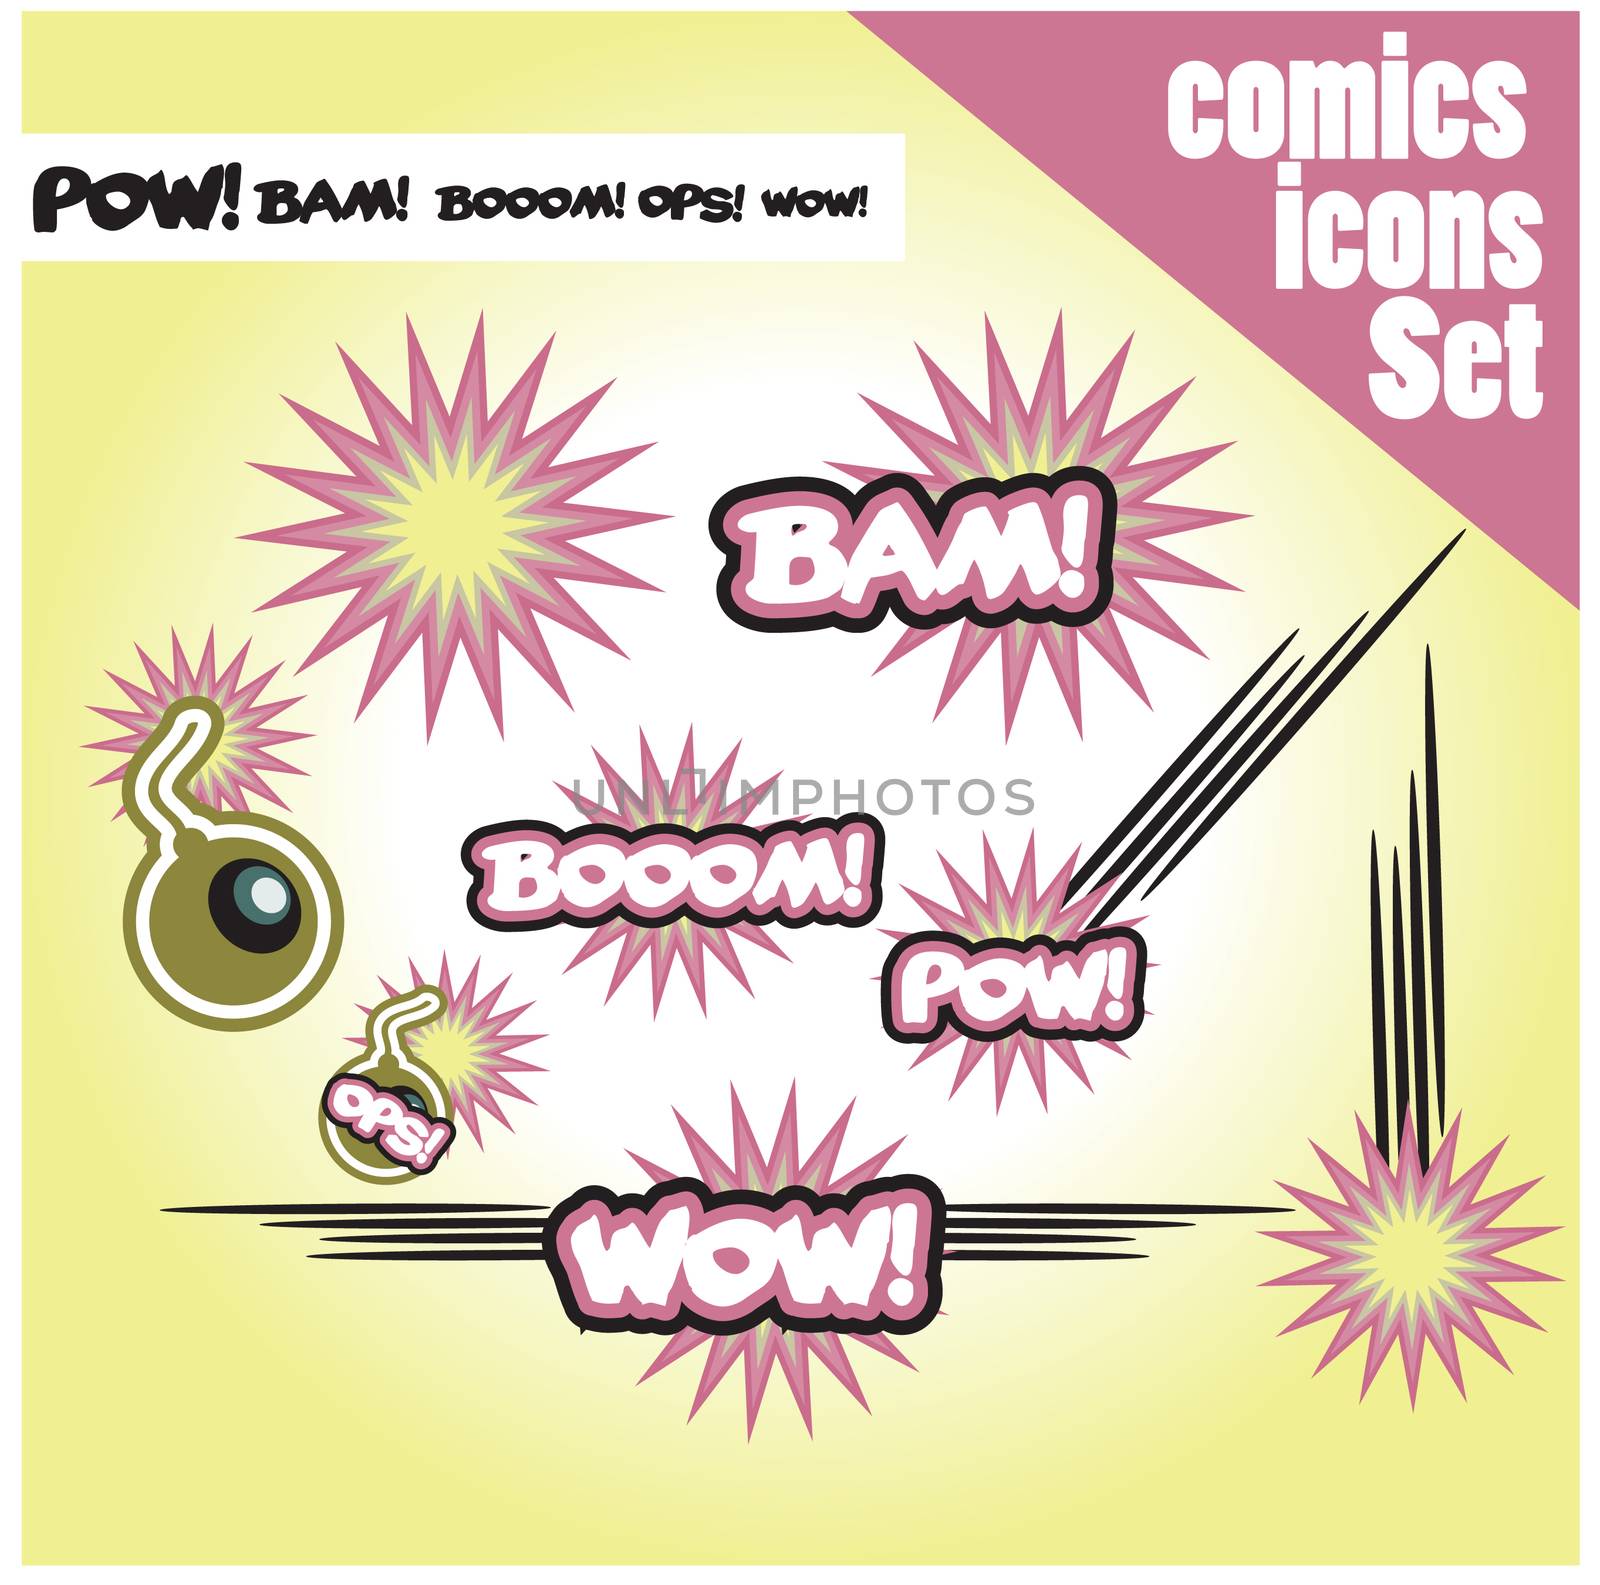 comic book style bombs boom bam wow pow ops  explode by tamaravector